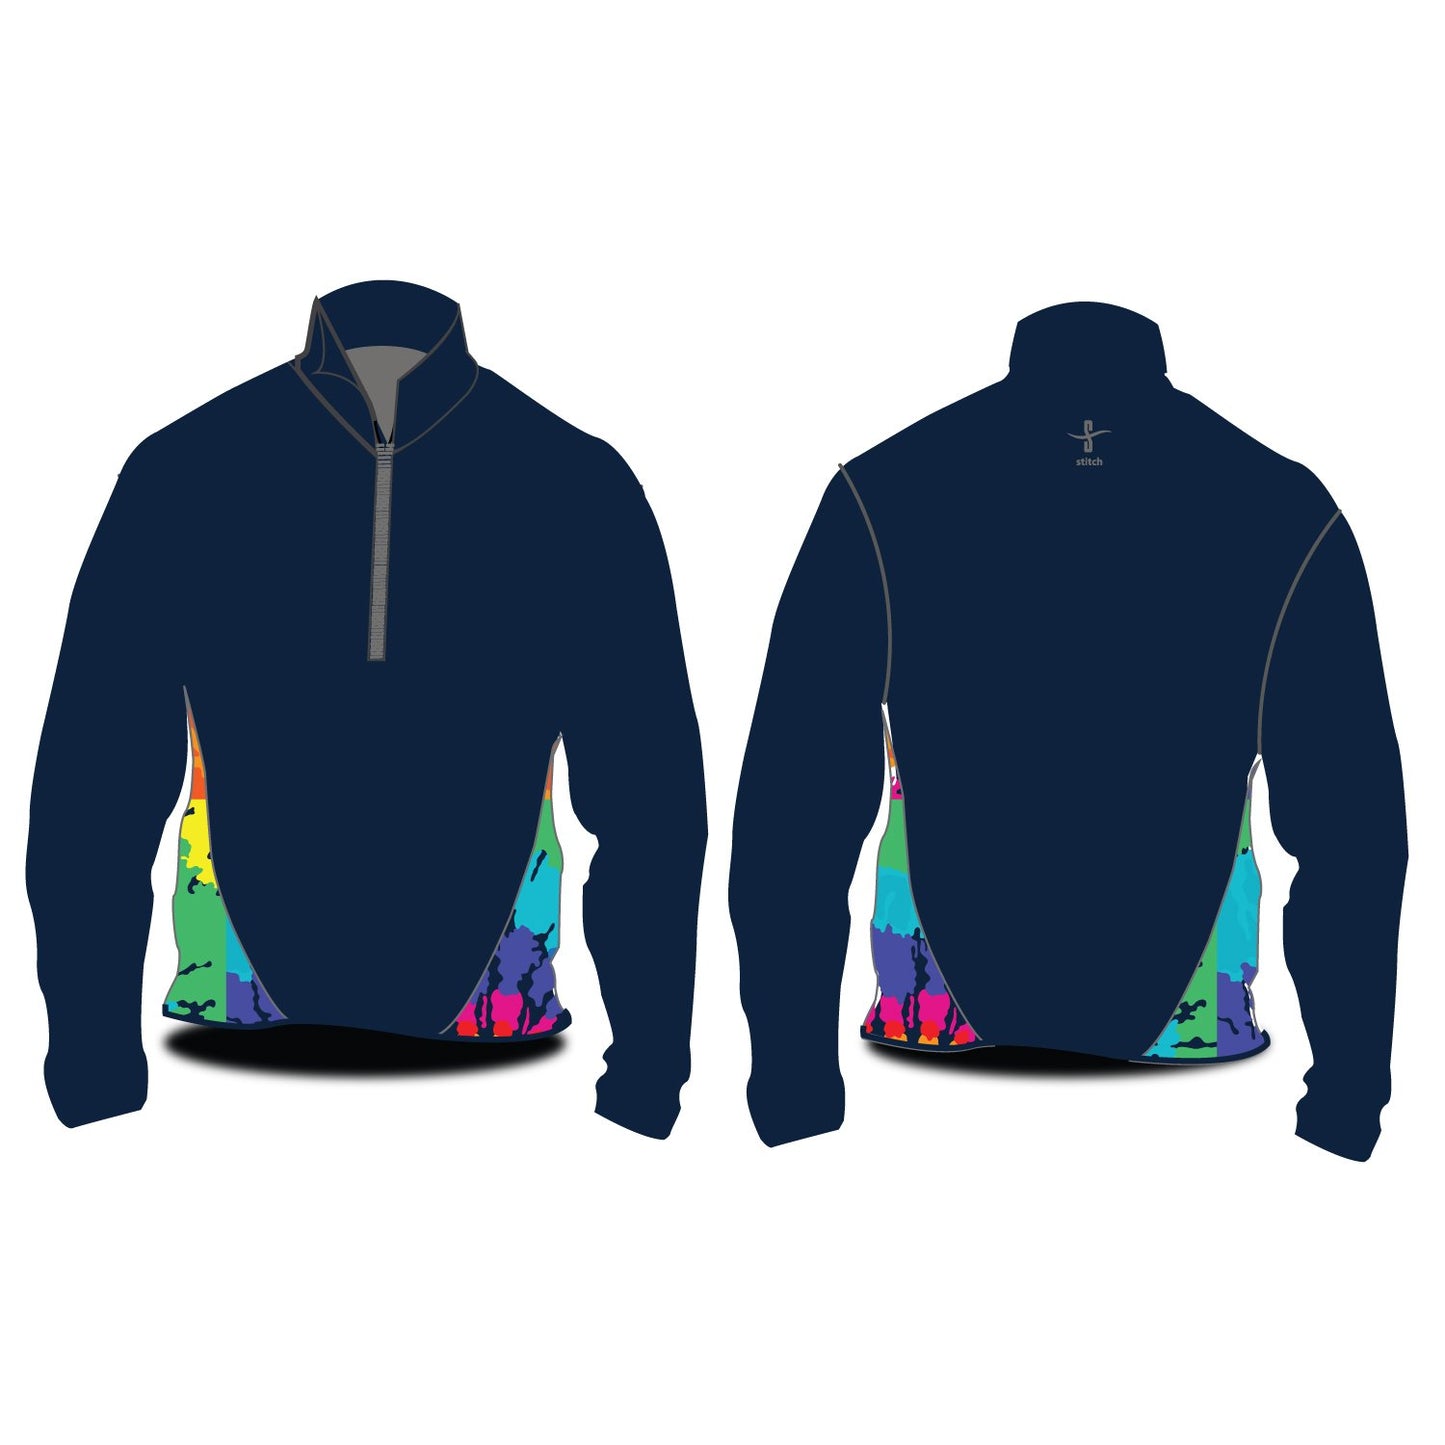 Stitch Rowing 24-7 Softshell Jacket with Tie Dye Side Panels